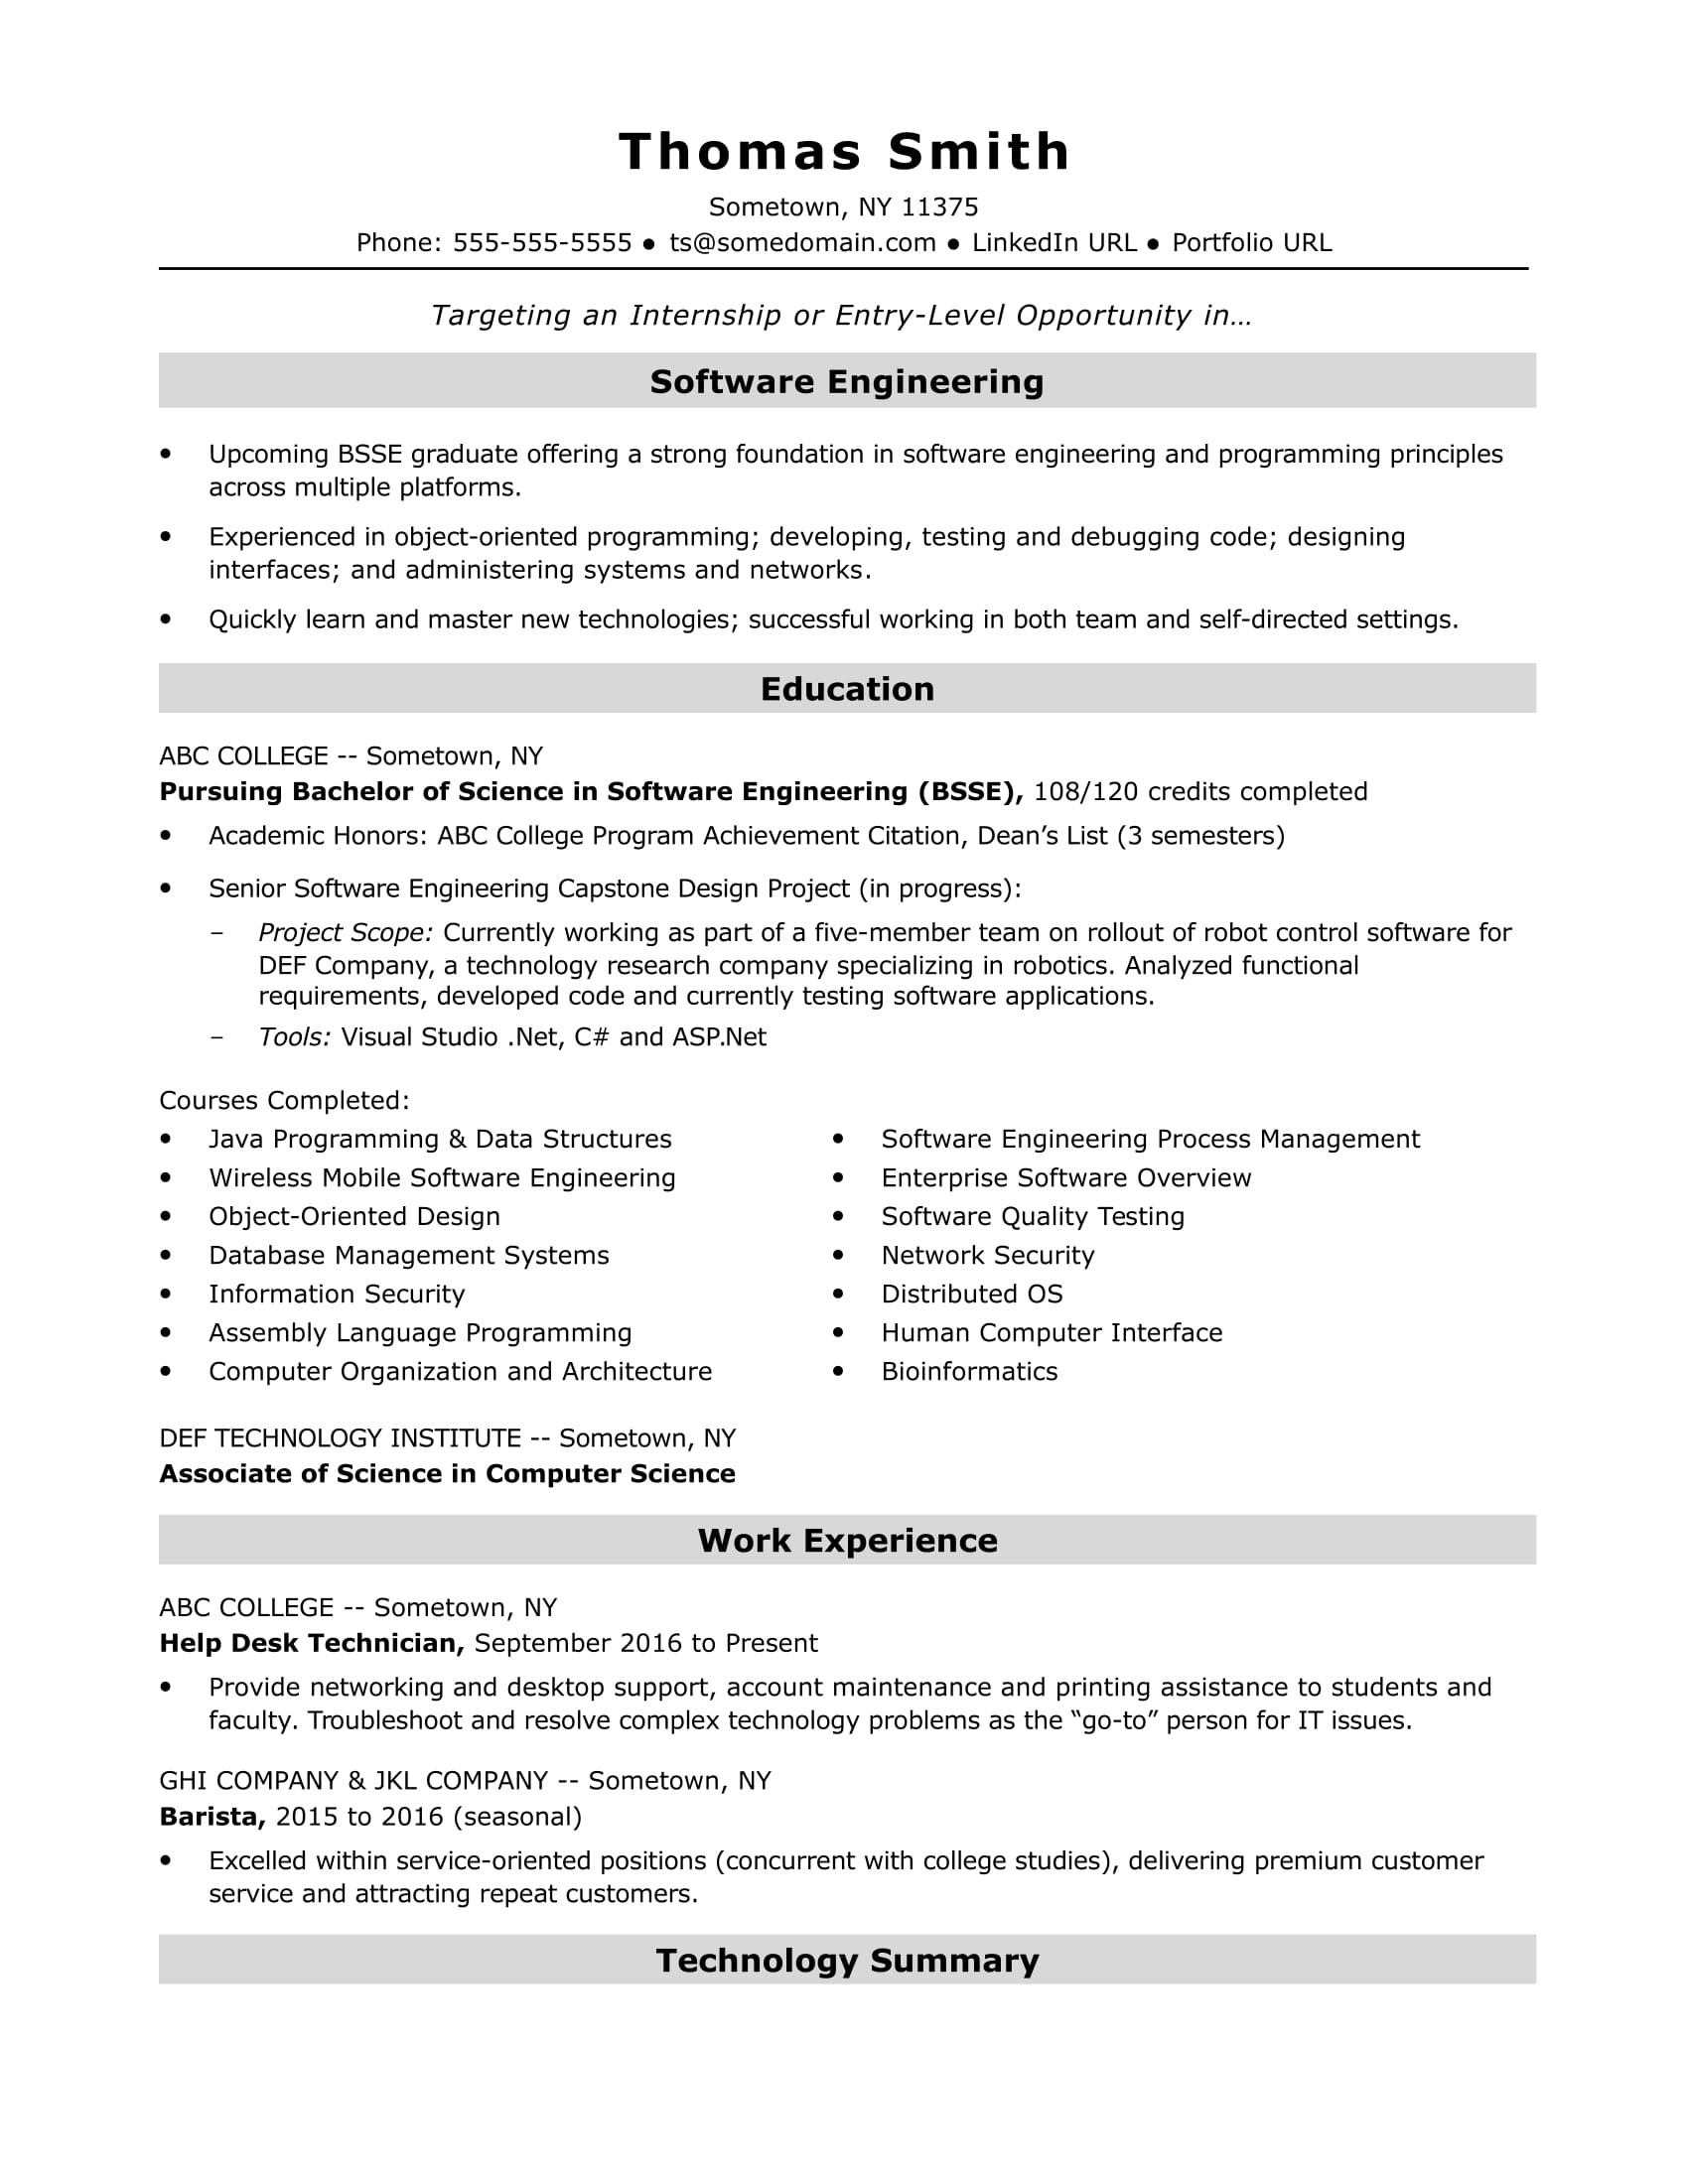 Sample Resume for Computer Science Engineering Students Entry-level software Engineer Resume Sample Monster.com